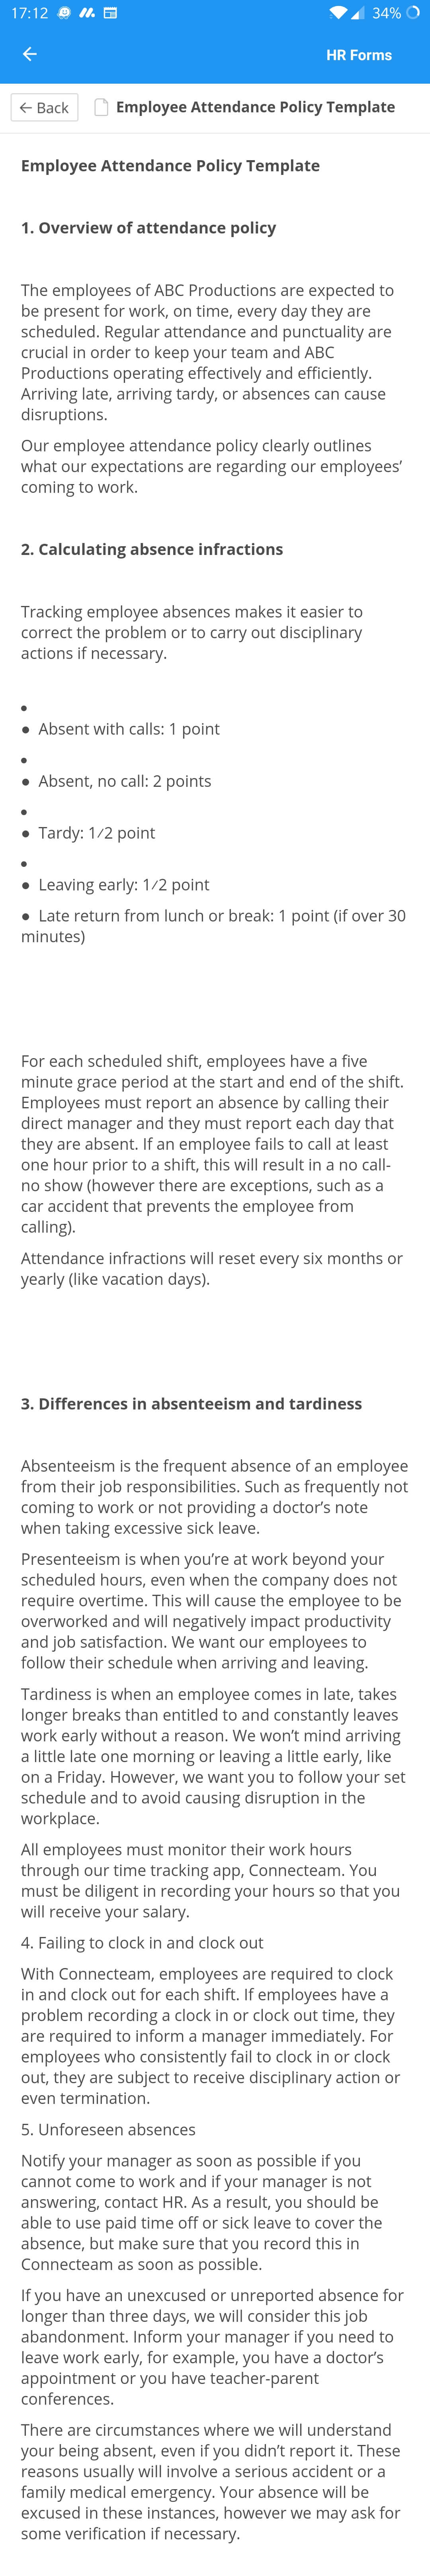 Employee Attendance Policy Template